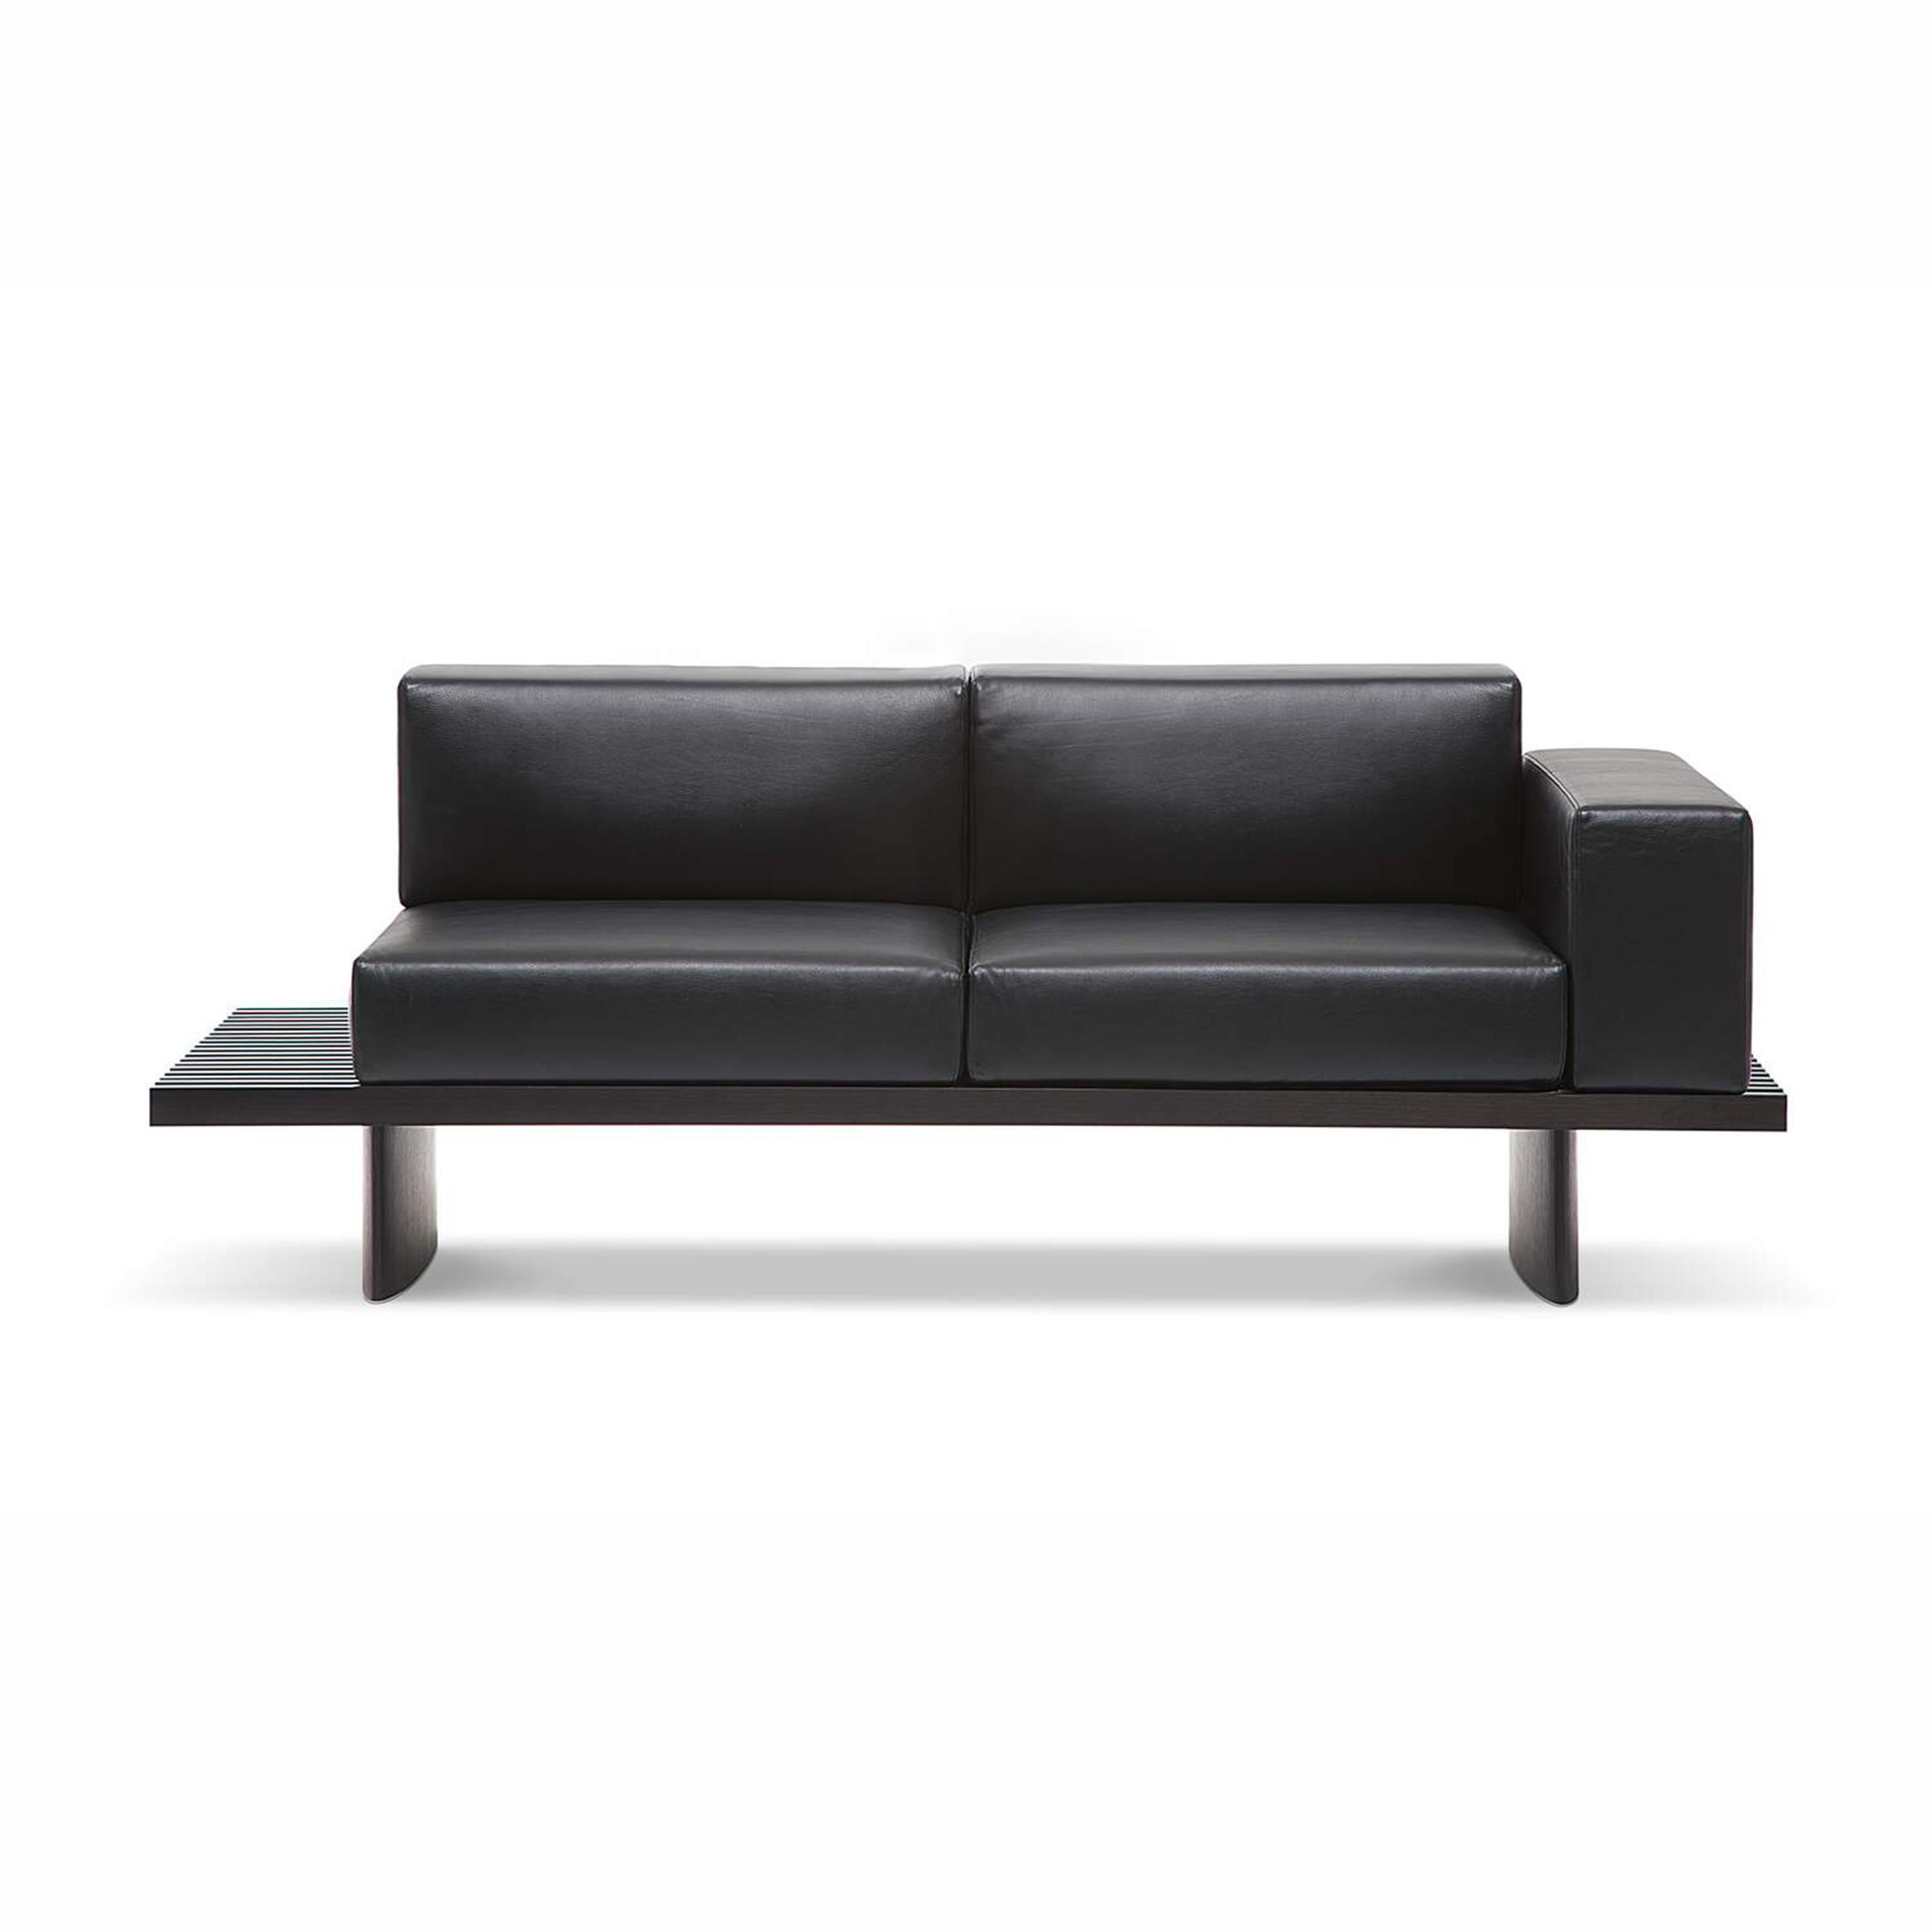 Charlotte Perriand Refolo Modular Sofa, Wood and Black Leather by Cassina For Sale 4